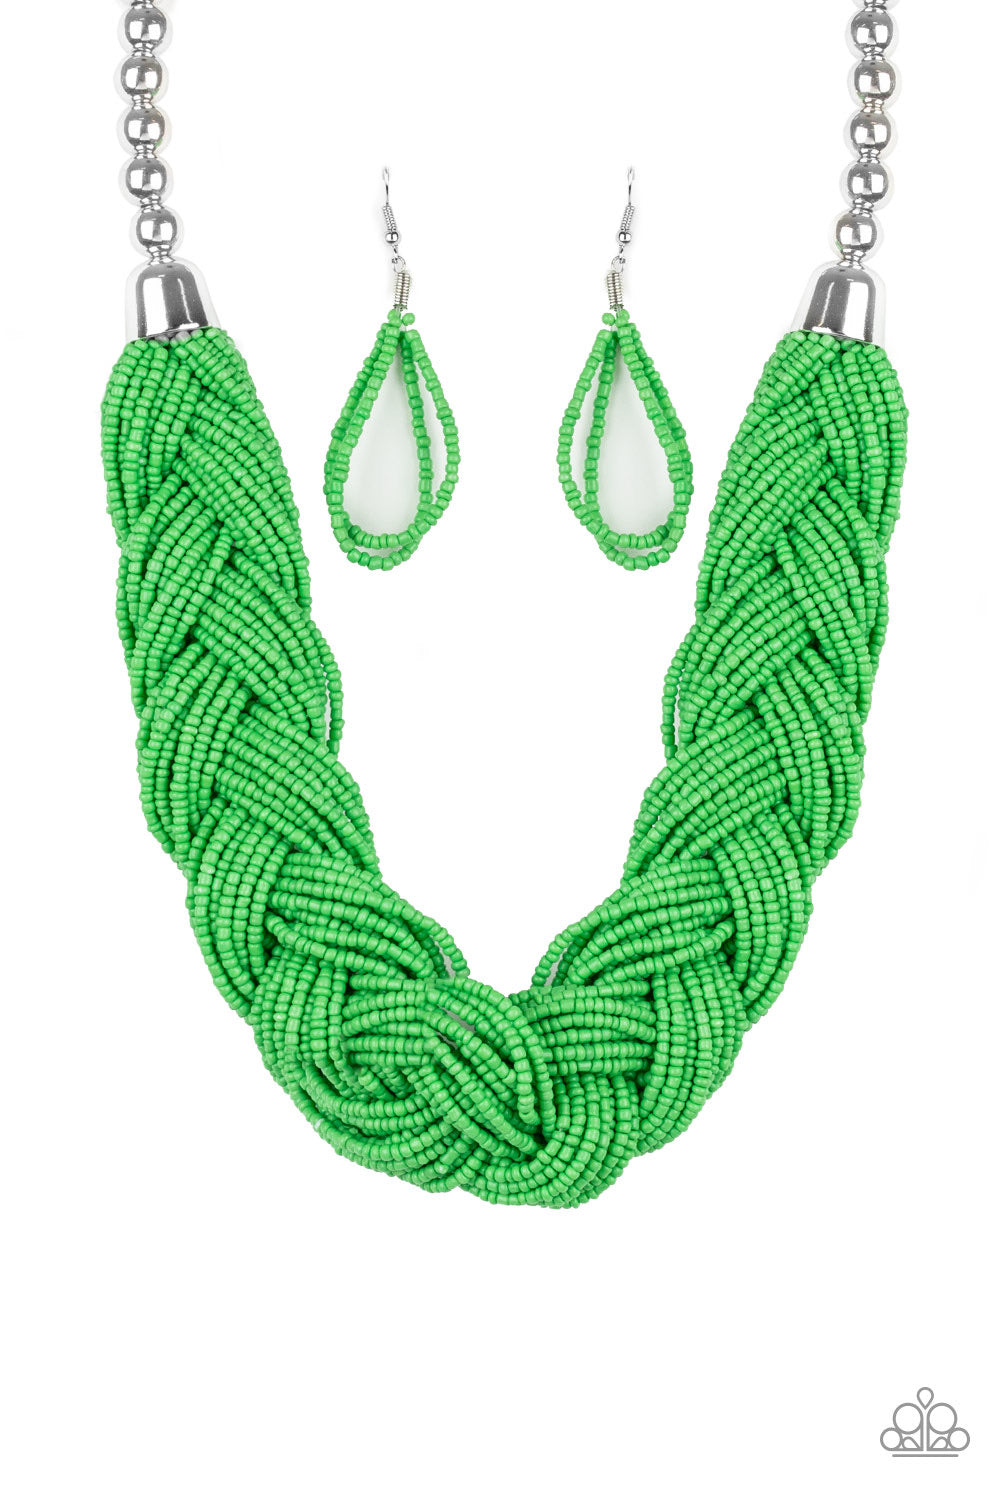 The Great Outback Green-Necklace